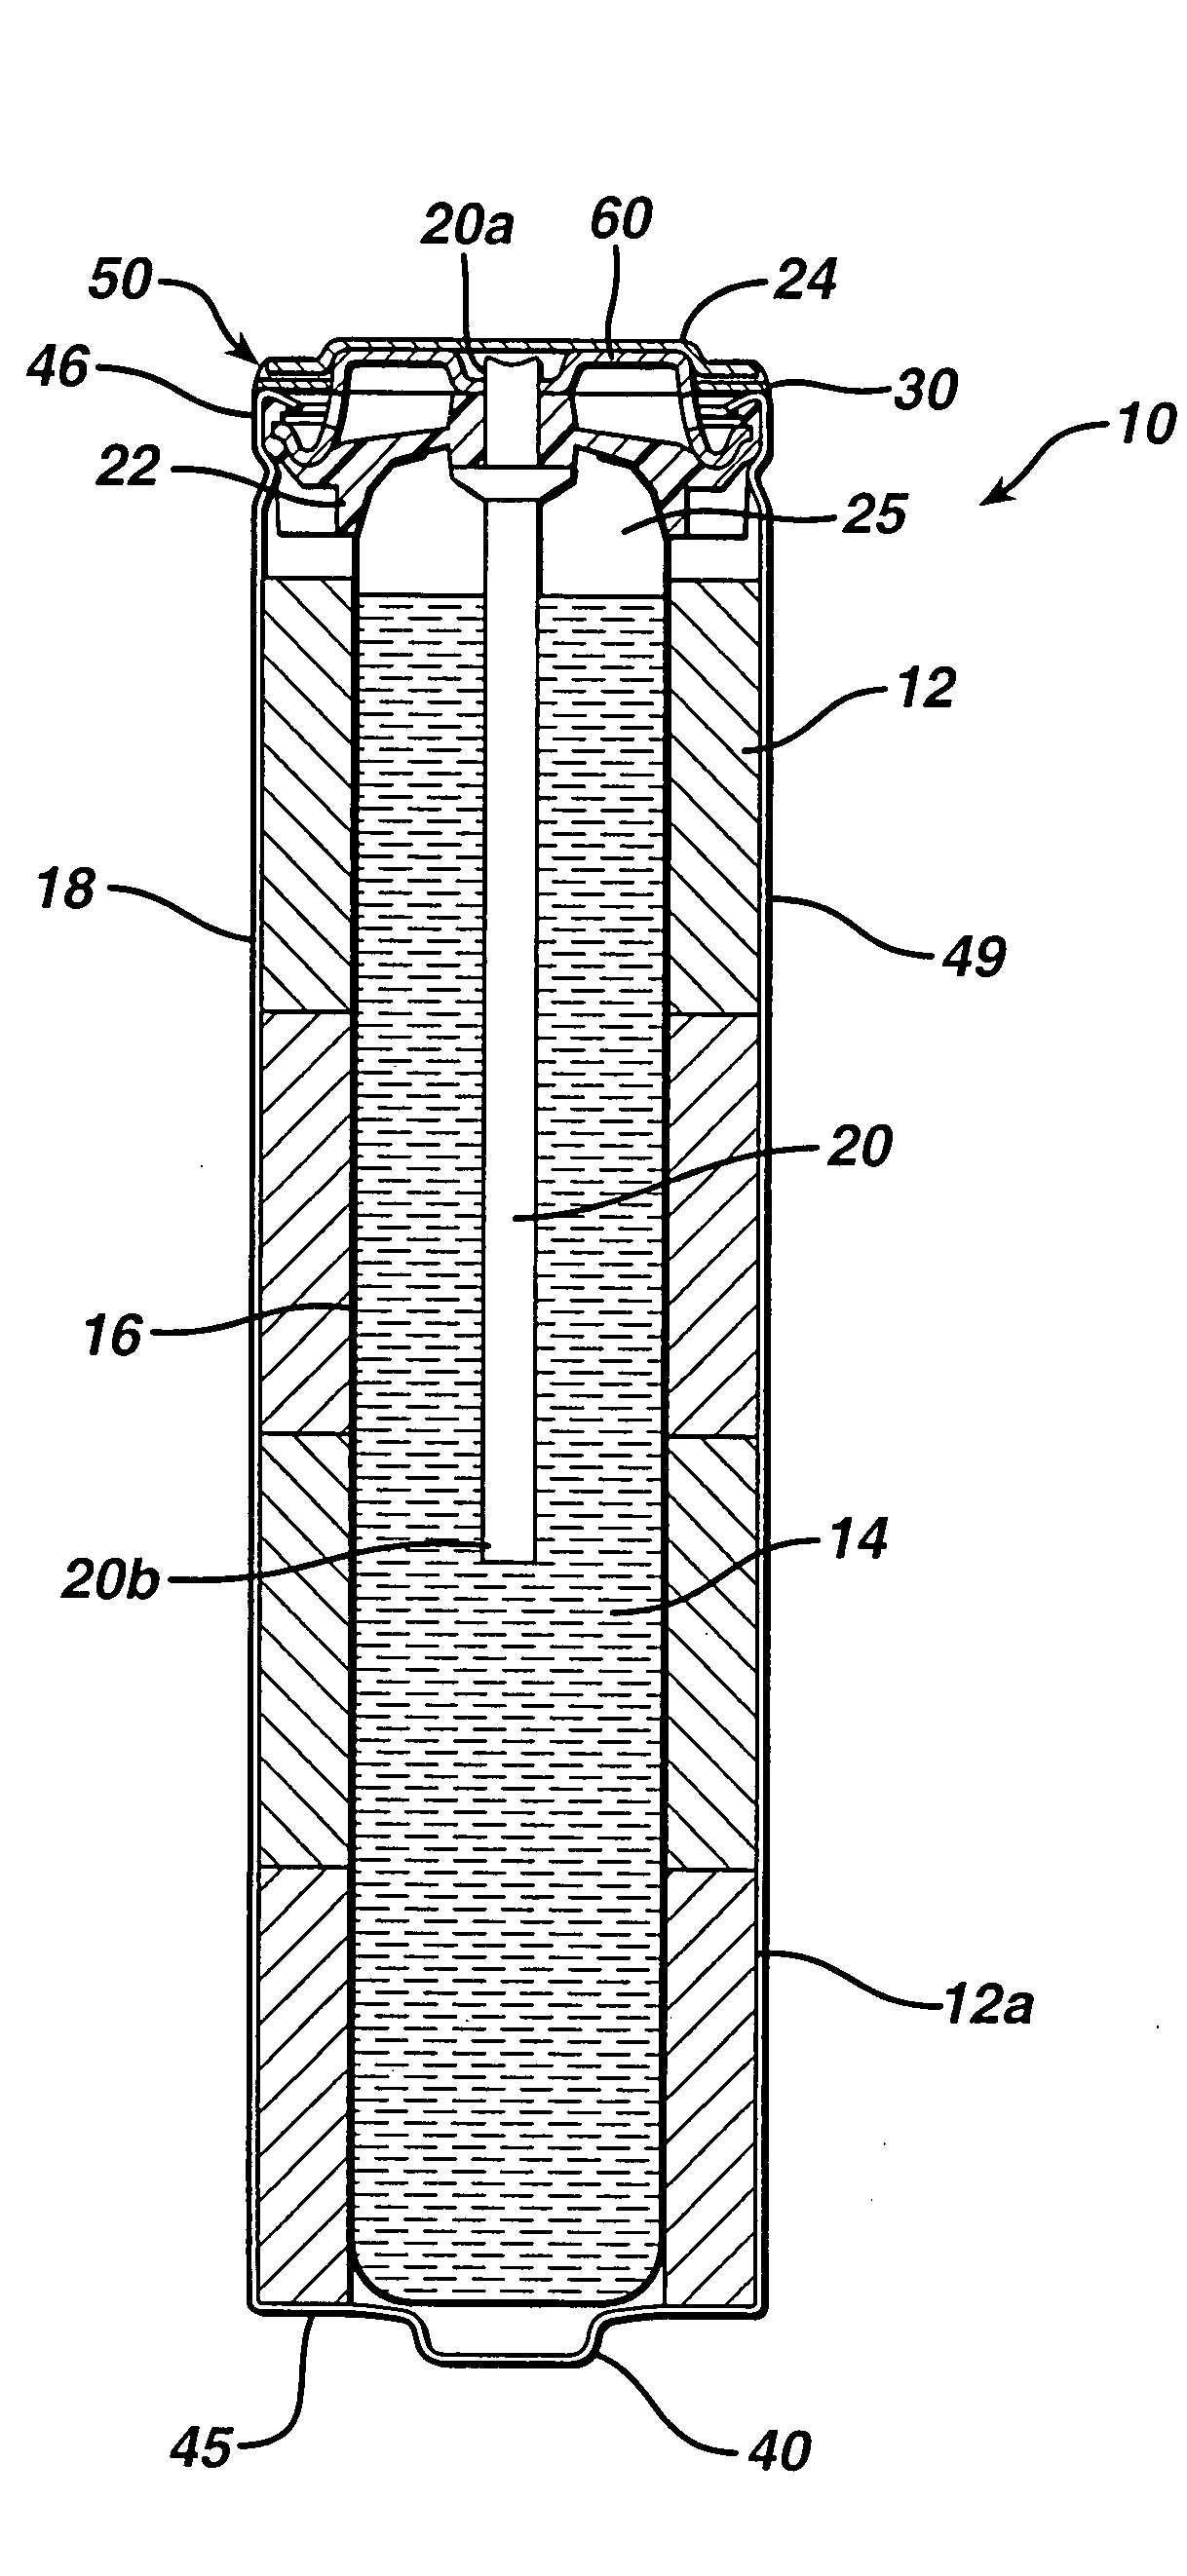 Alkaline battery including nickel oxyhydroxide cathode and zinc anode